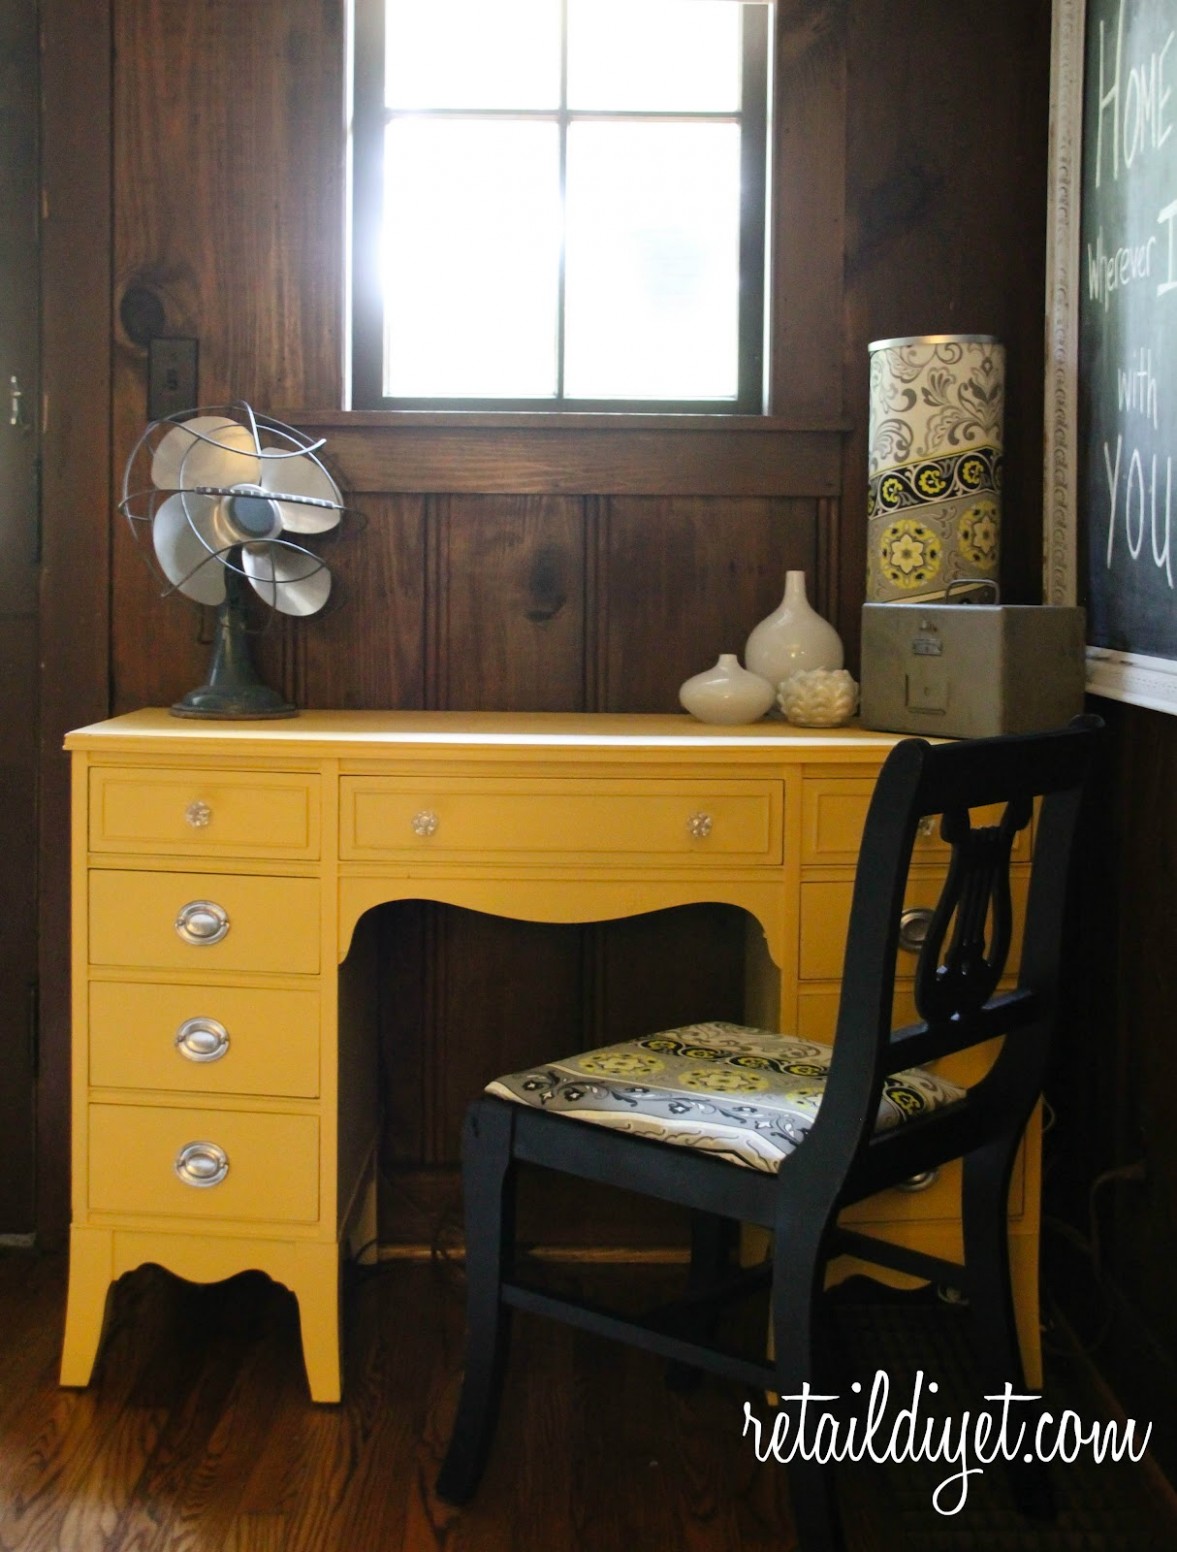 Our Tennessee Life Annie Sloan Chalk Paint Colors Arles